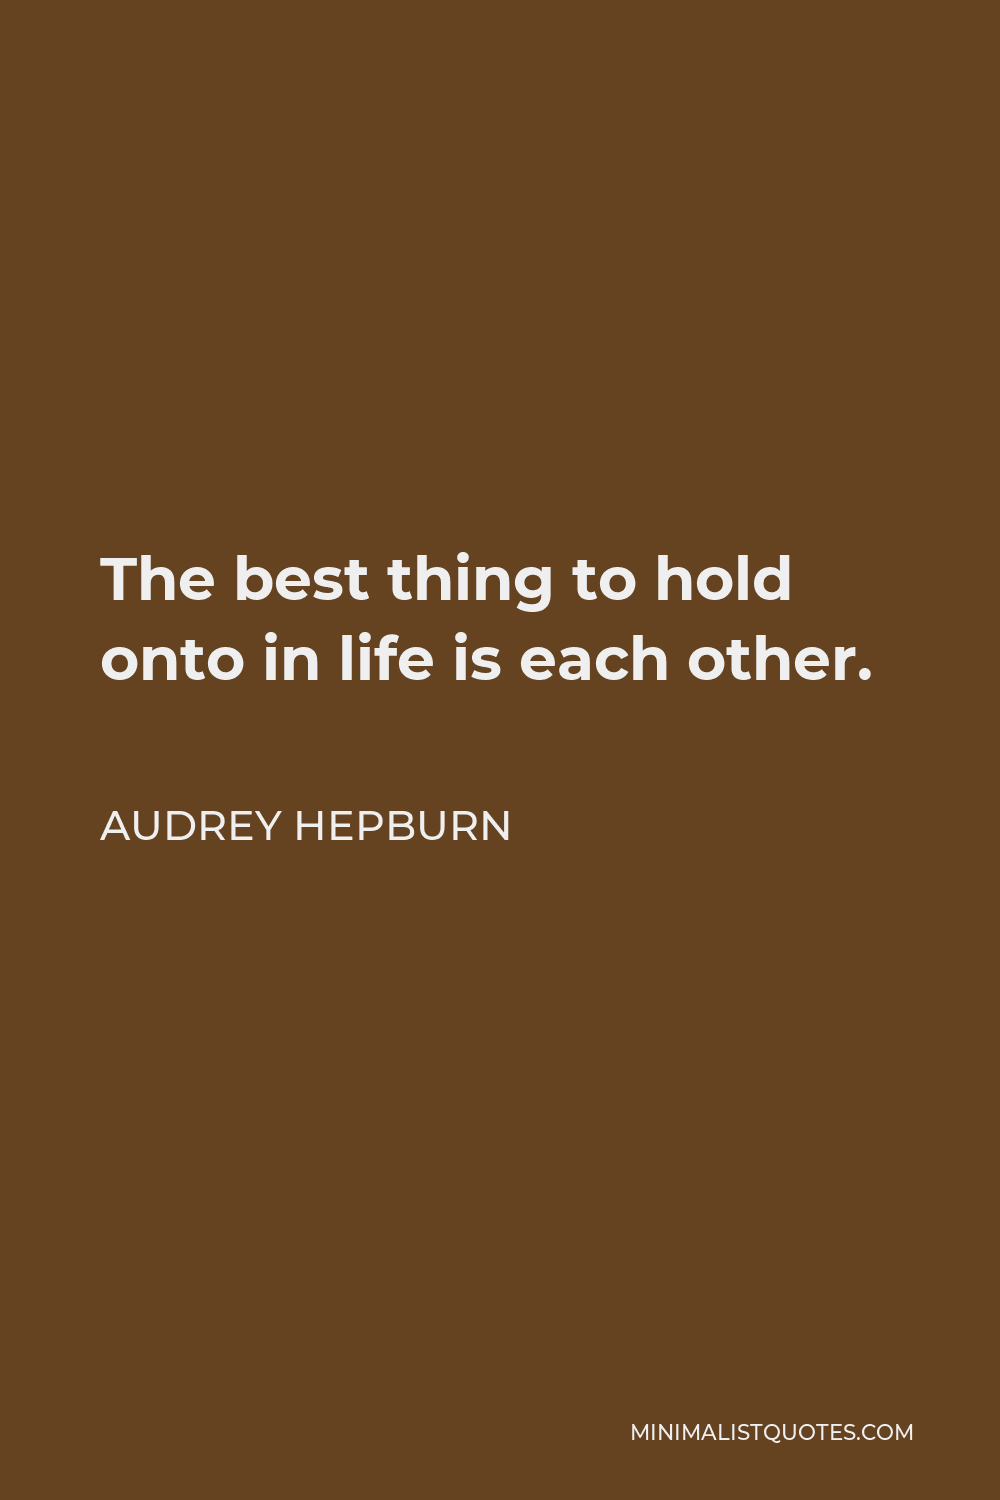 Audrey Hepburn Quote - The best thing to hold onto in life is each other.